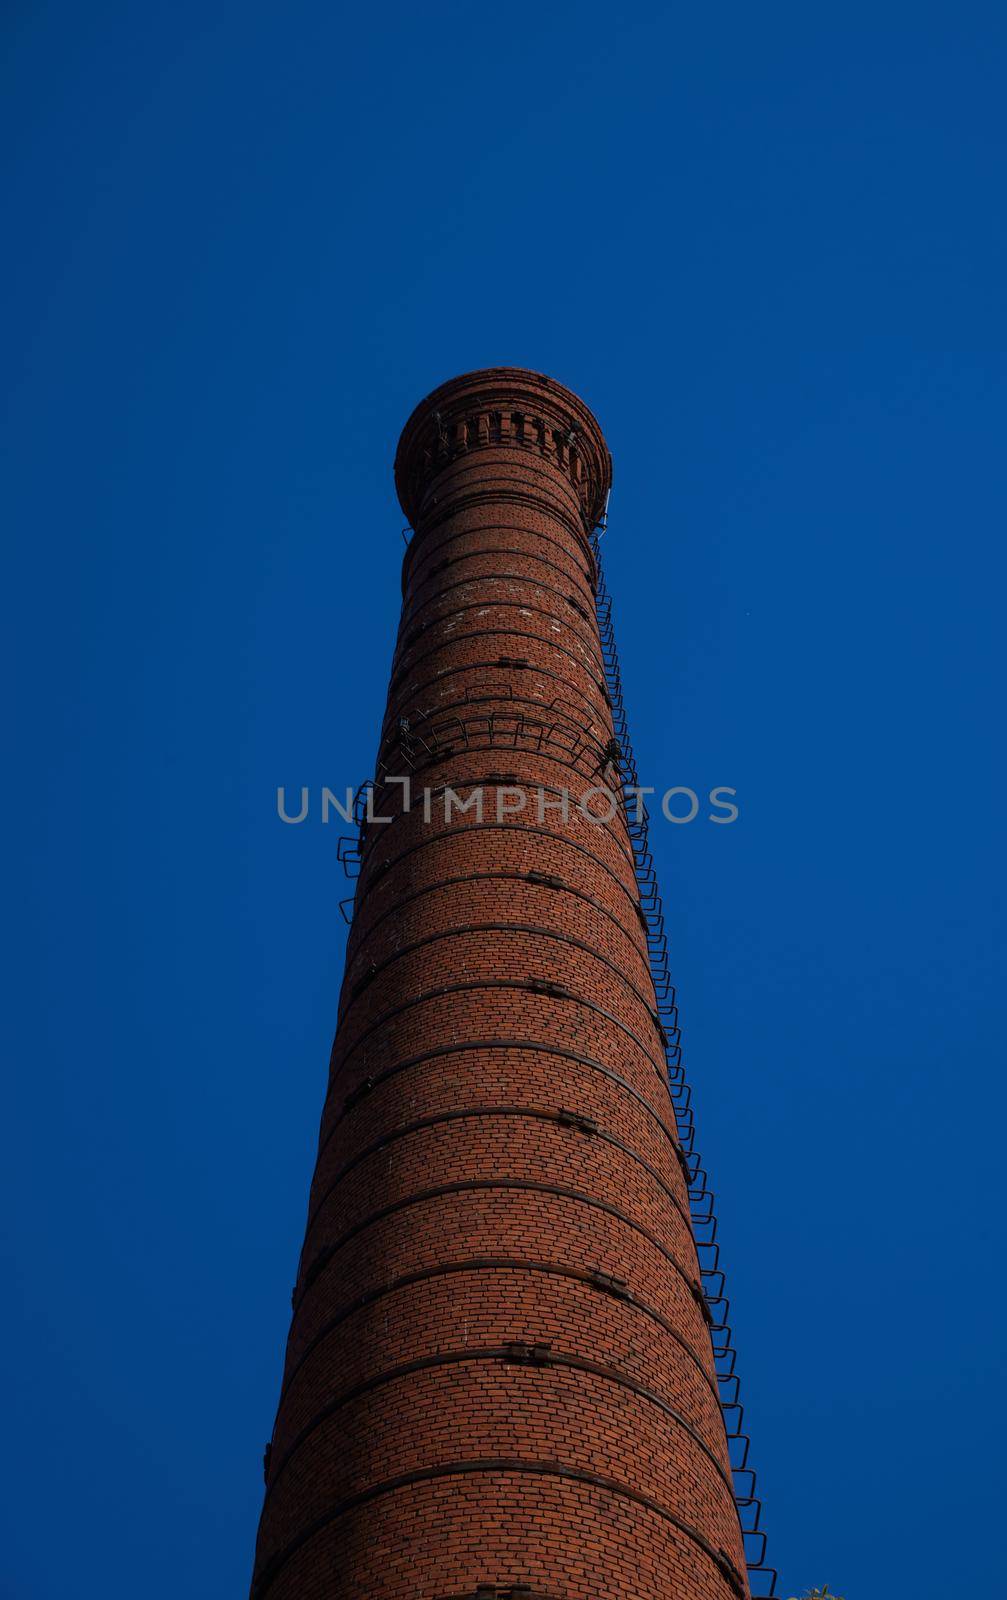 tall chimney old red bricks in an old factory. smoke stack An old brick chimney against a blue sky.